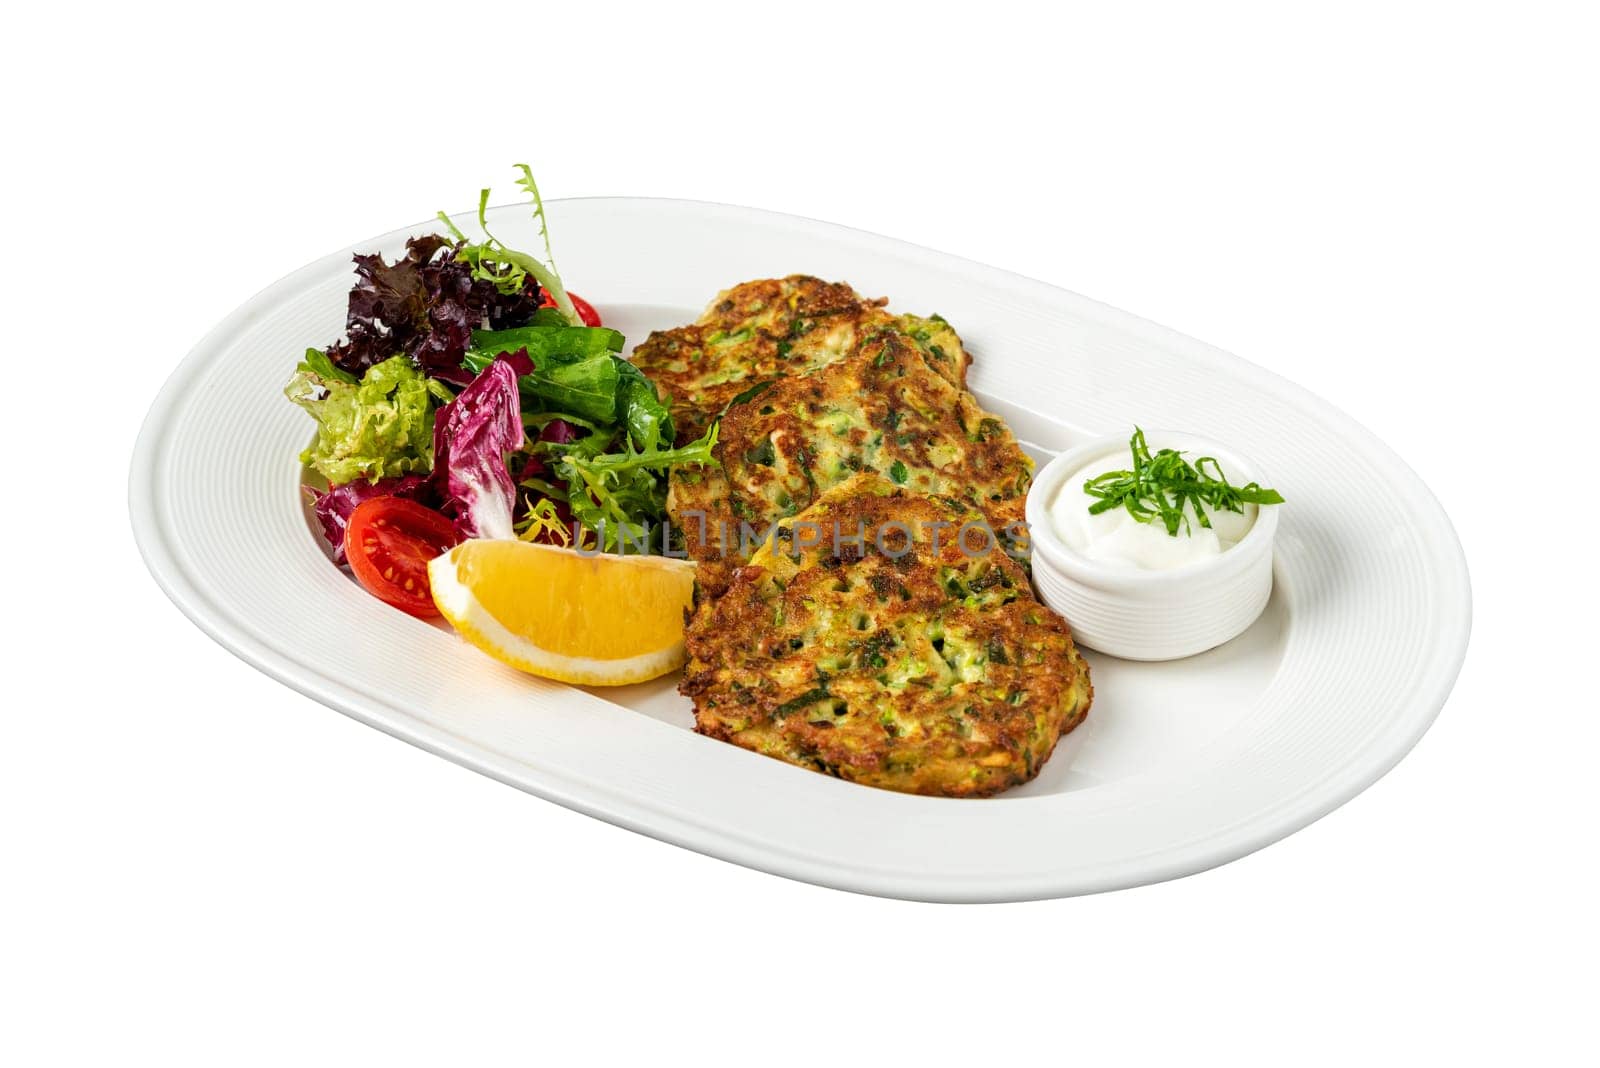 MUCVER. Traditional Turkish Zuccini Mucver. Mucver is a Turkish fritter or pancake, made from grated zucchini. by Sonat